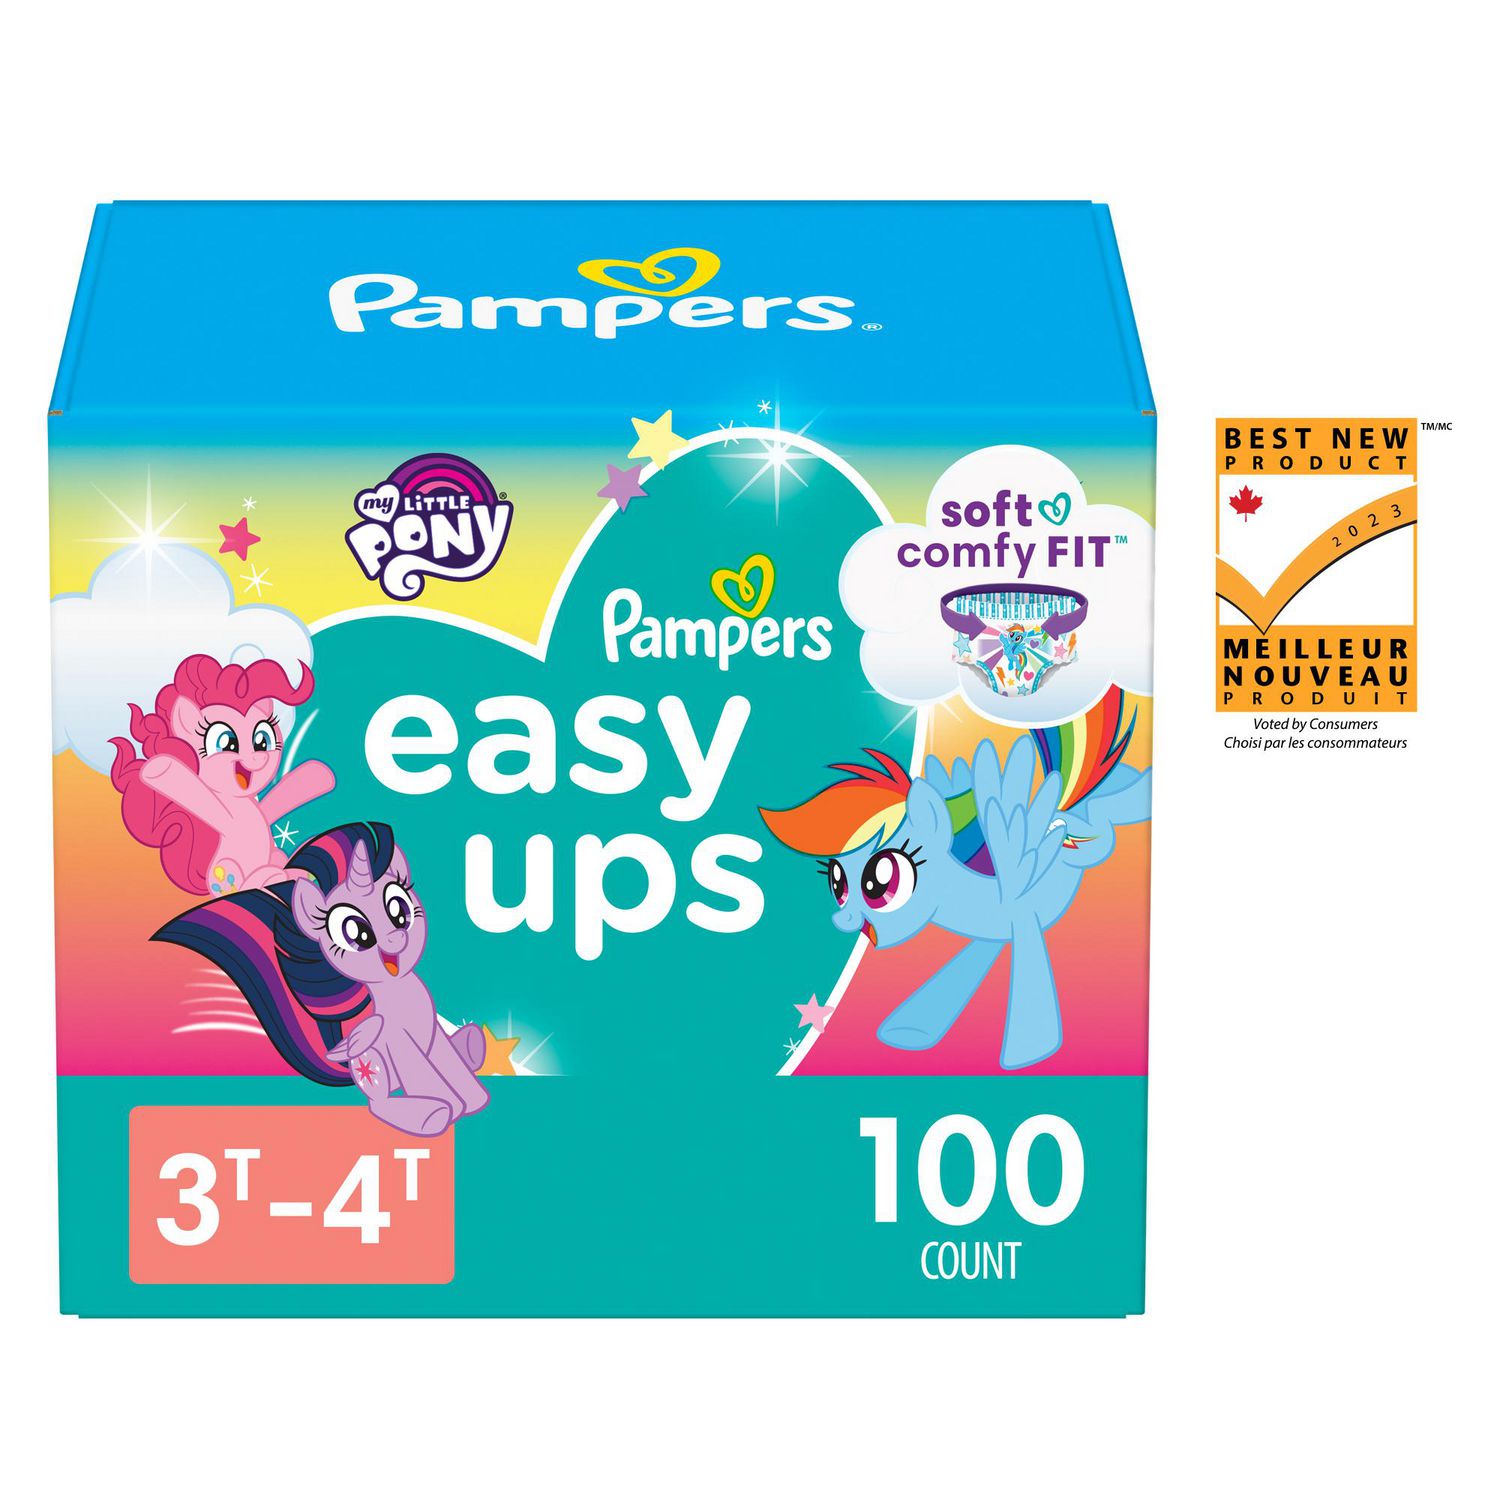 Save on Pampers Easy Ups PJ Masks 4T-5T Boys Training Underwear 37+ lbs  Order Online Delivery